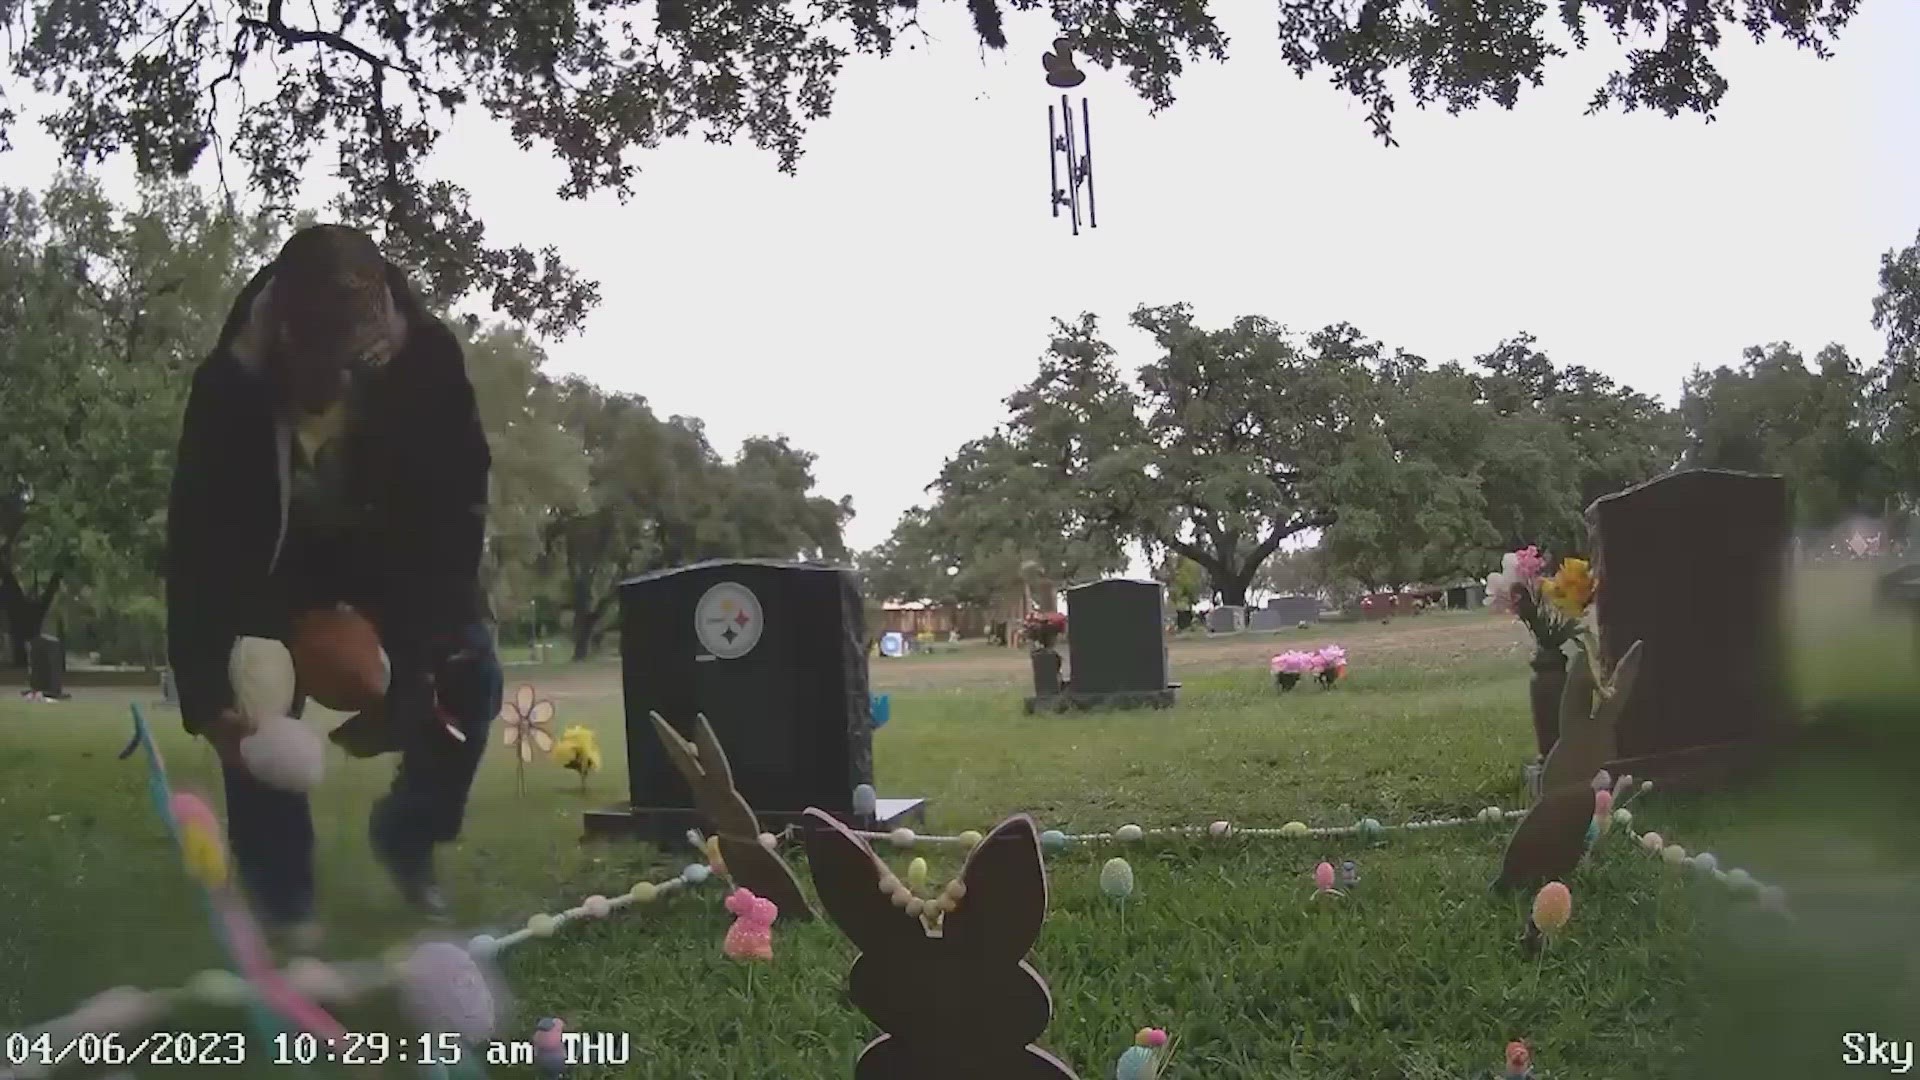 The heartbroken mother put up cameras next to the tombstone. She said this has happened at least four times.